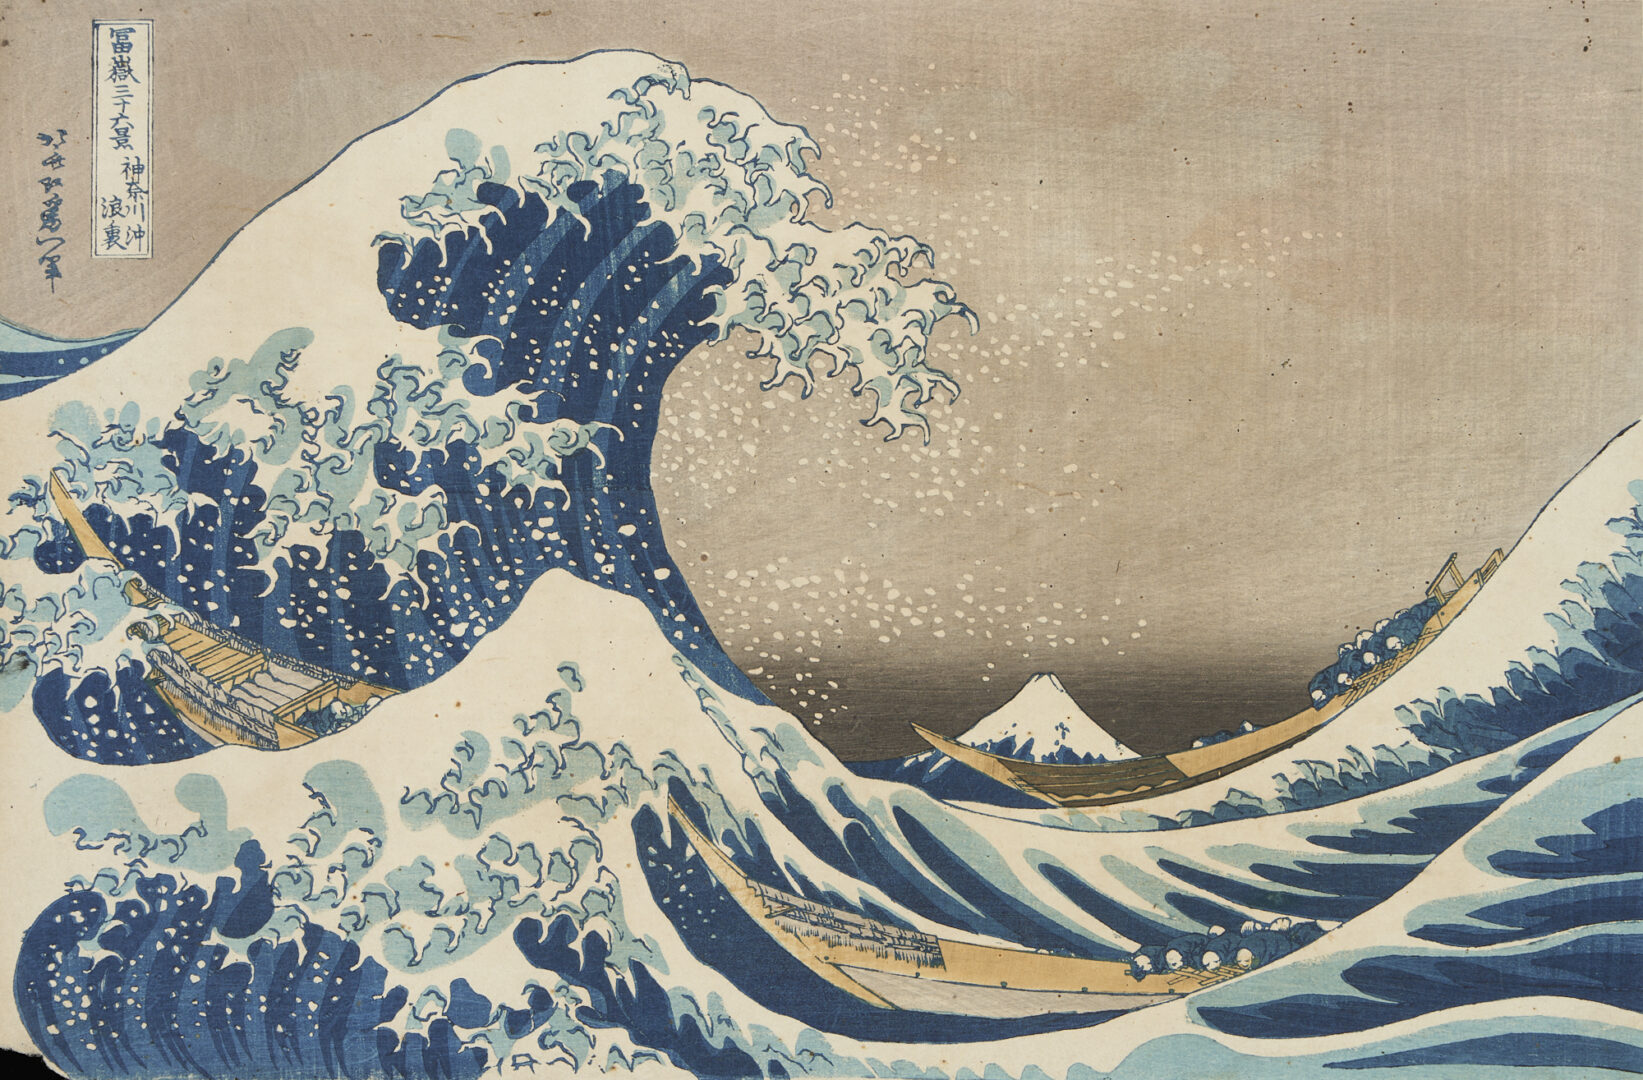 Lot 18: After Hokusai, The Great Wave, Japanese Woodblock Print